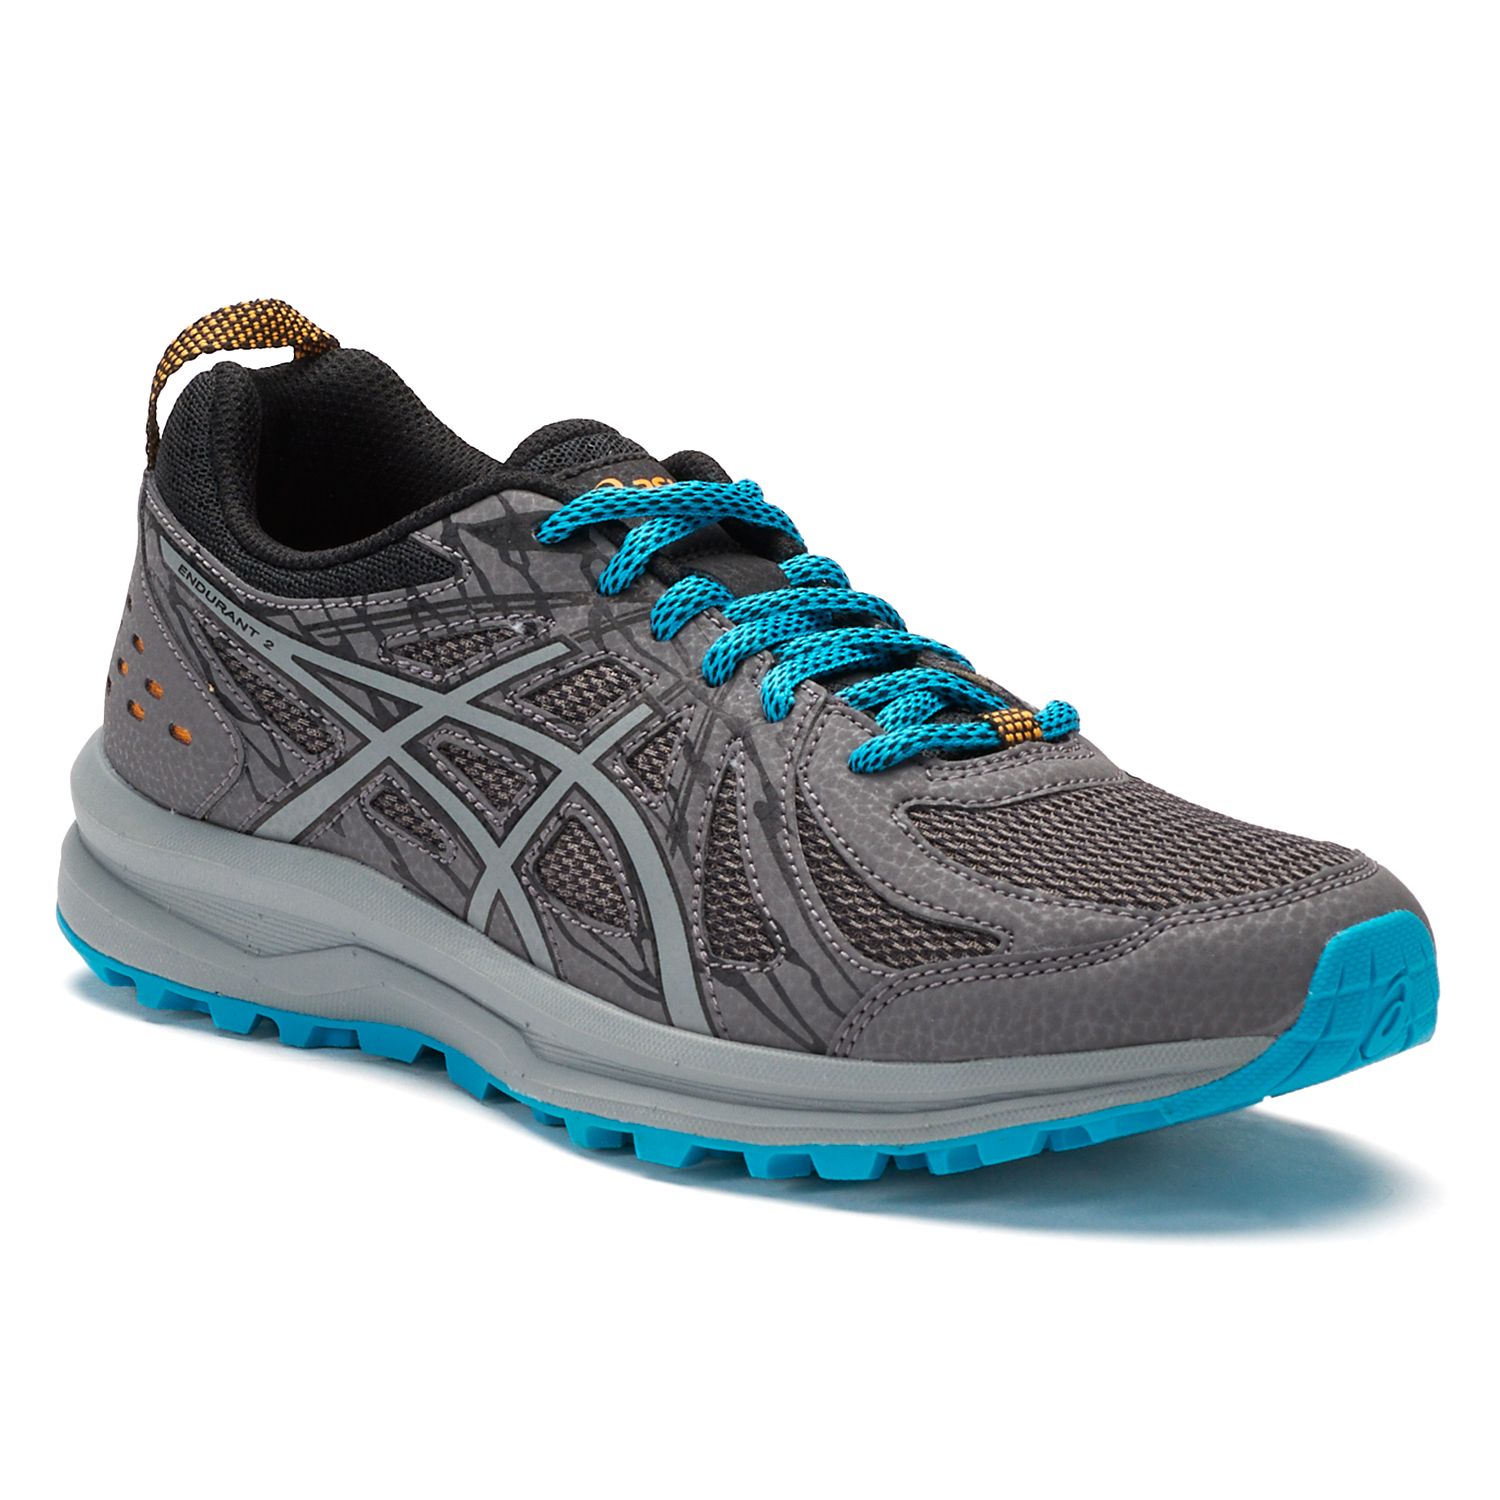 asics women's frequent trail running shoes reviews